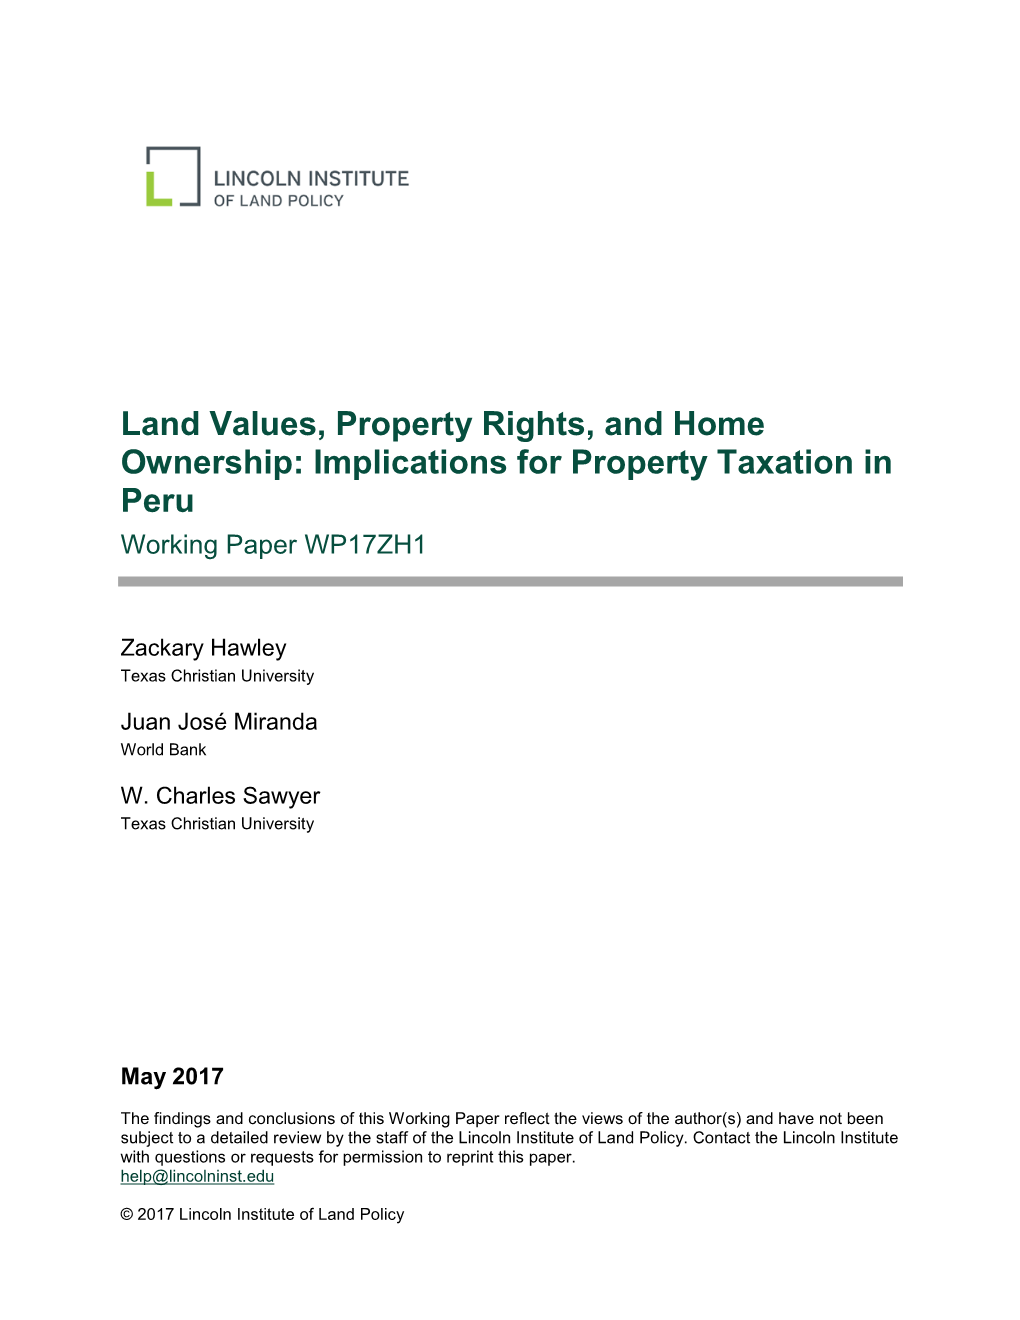 Land Values, Property Rights, and Home Ownership: Implications for Property Taxation in Peru Working Paper WP17ZH1